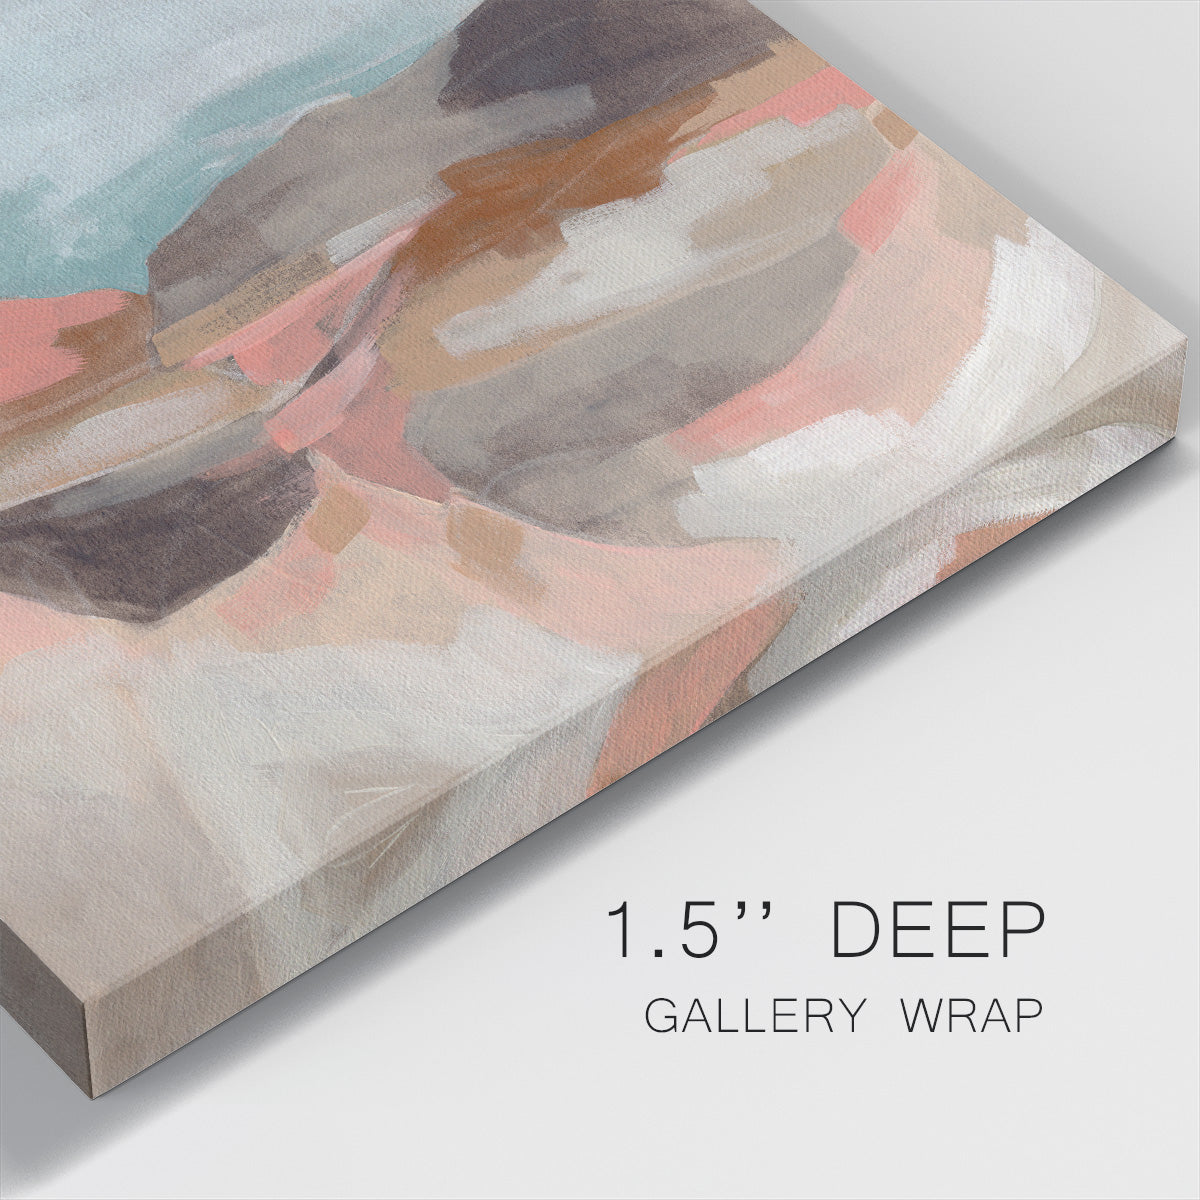 Tectonic Plateau II-Premium Gallery Wrapped Canvas - Ready to Hang